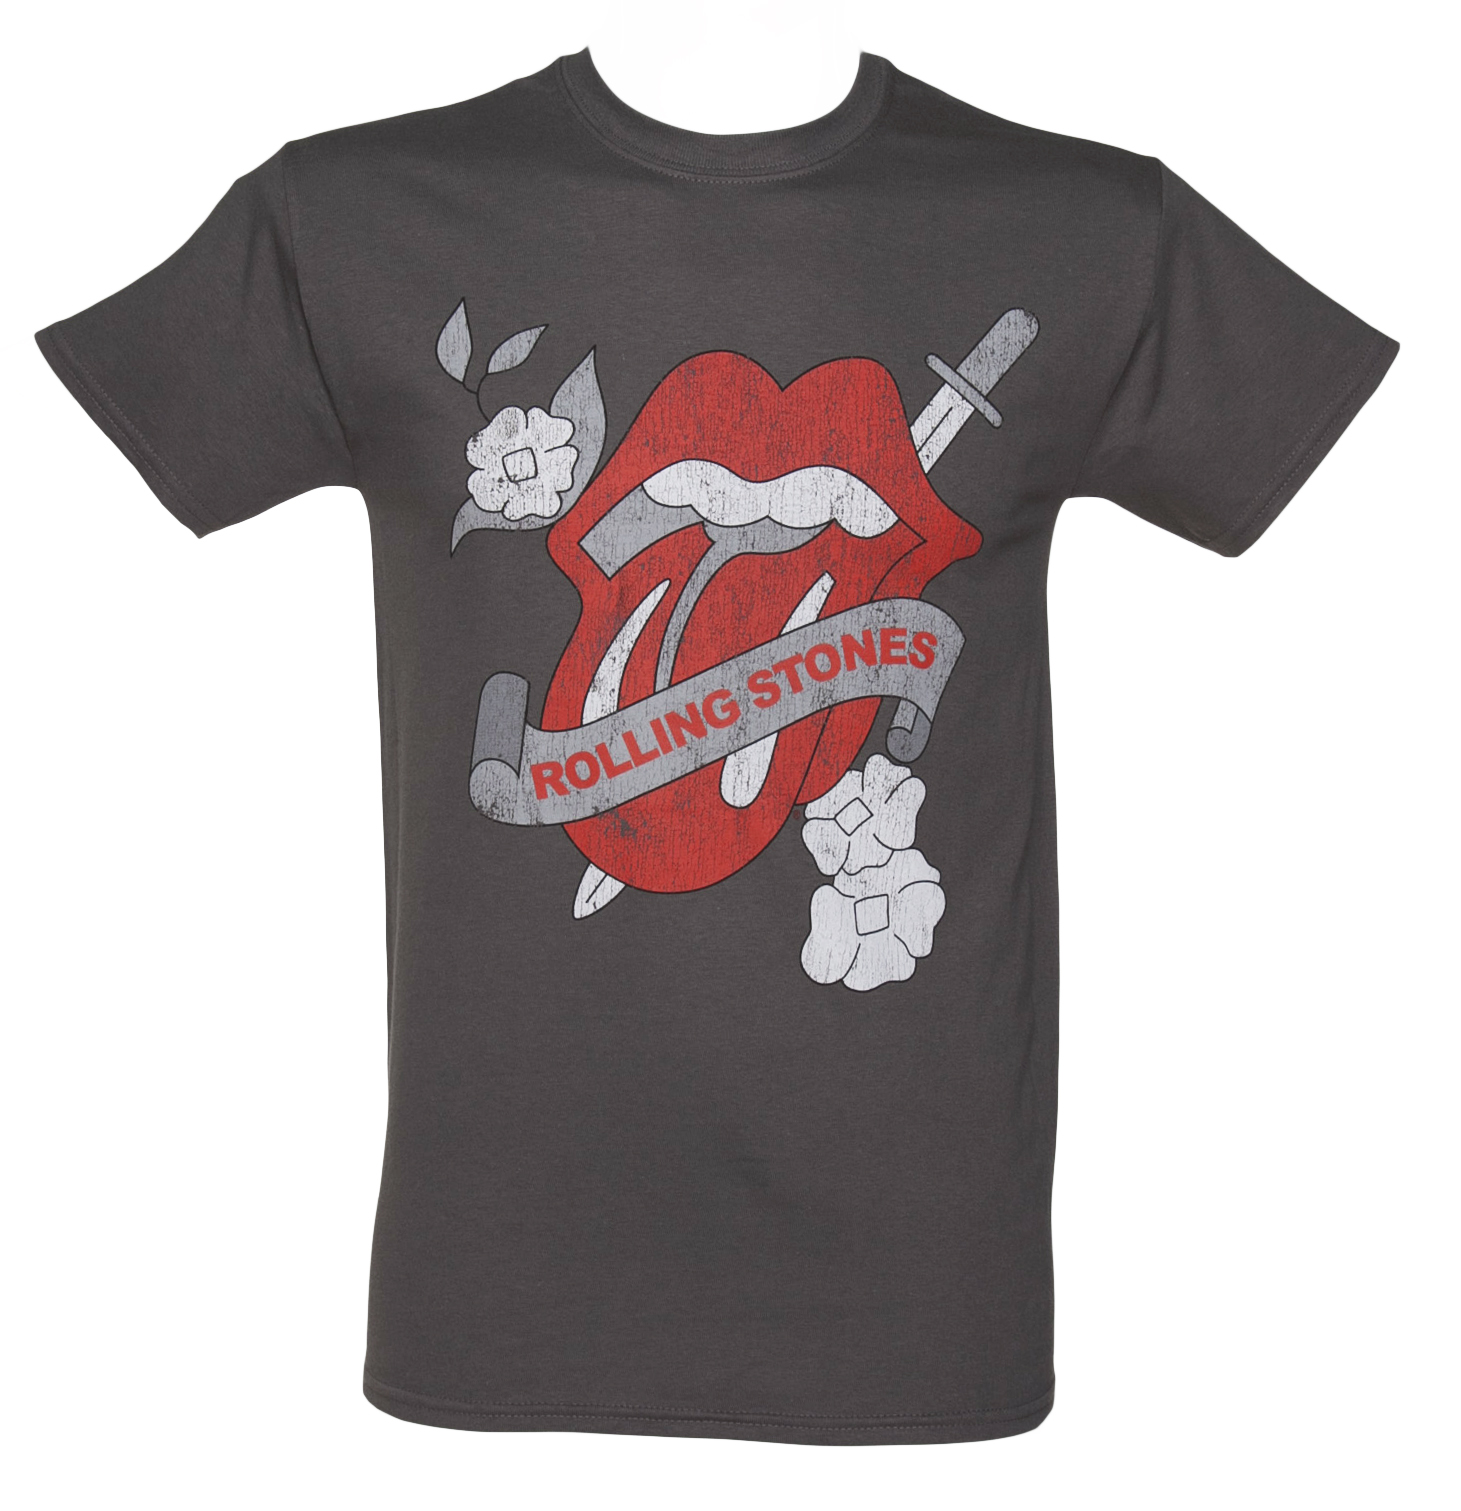 Mens Charcoal Vintage Tattoo Rolling Stones